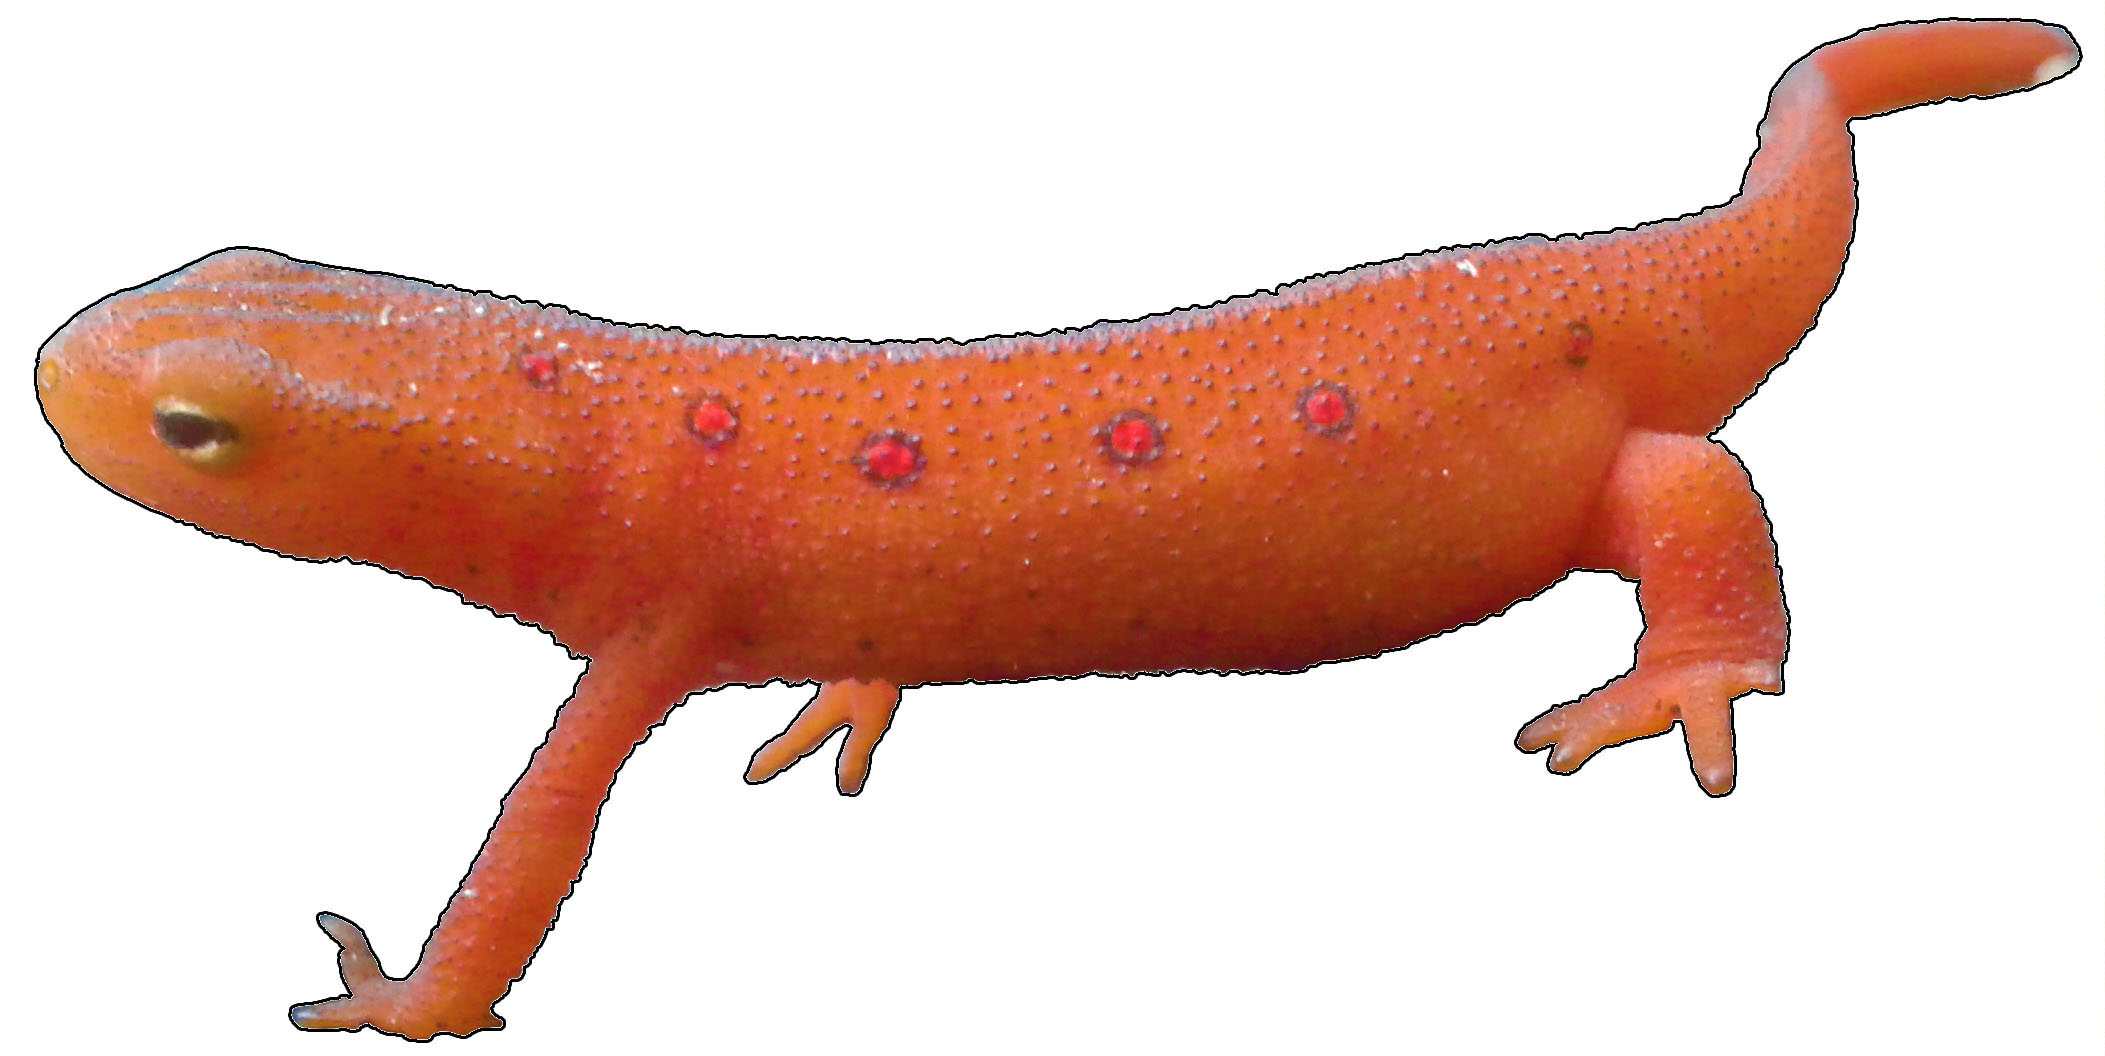 The Red Eft, the juvenile terrestrial life phase of the Red Spotted Newt.